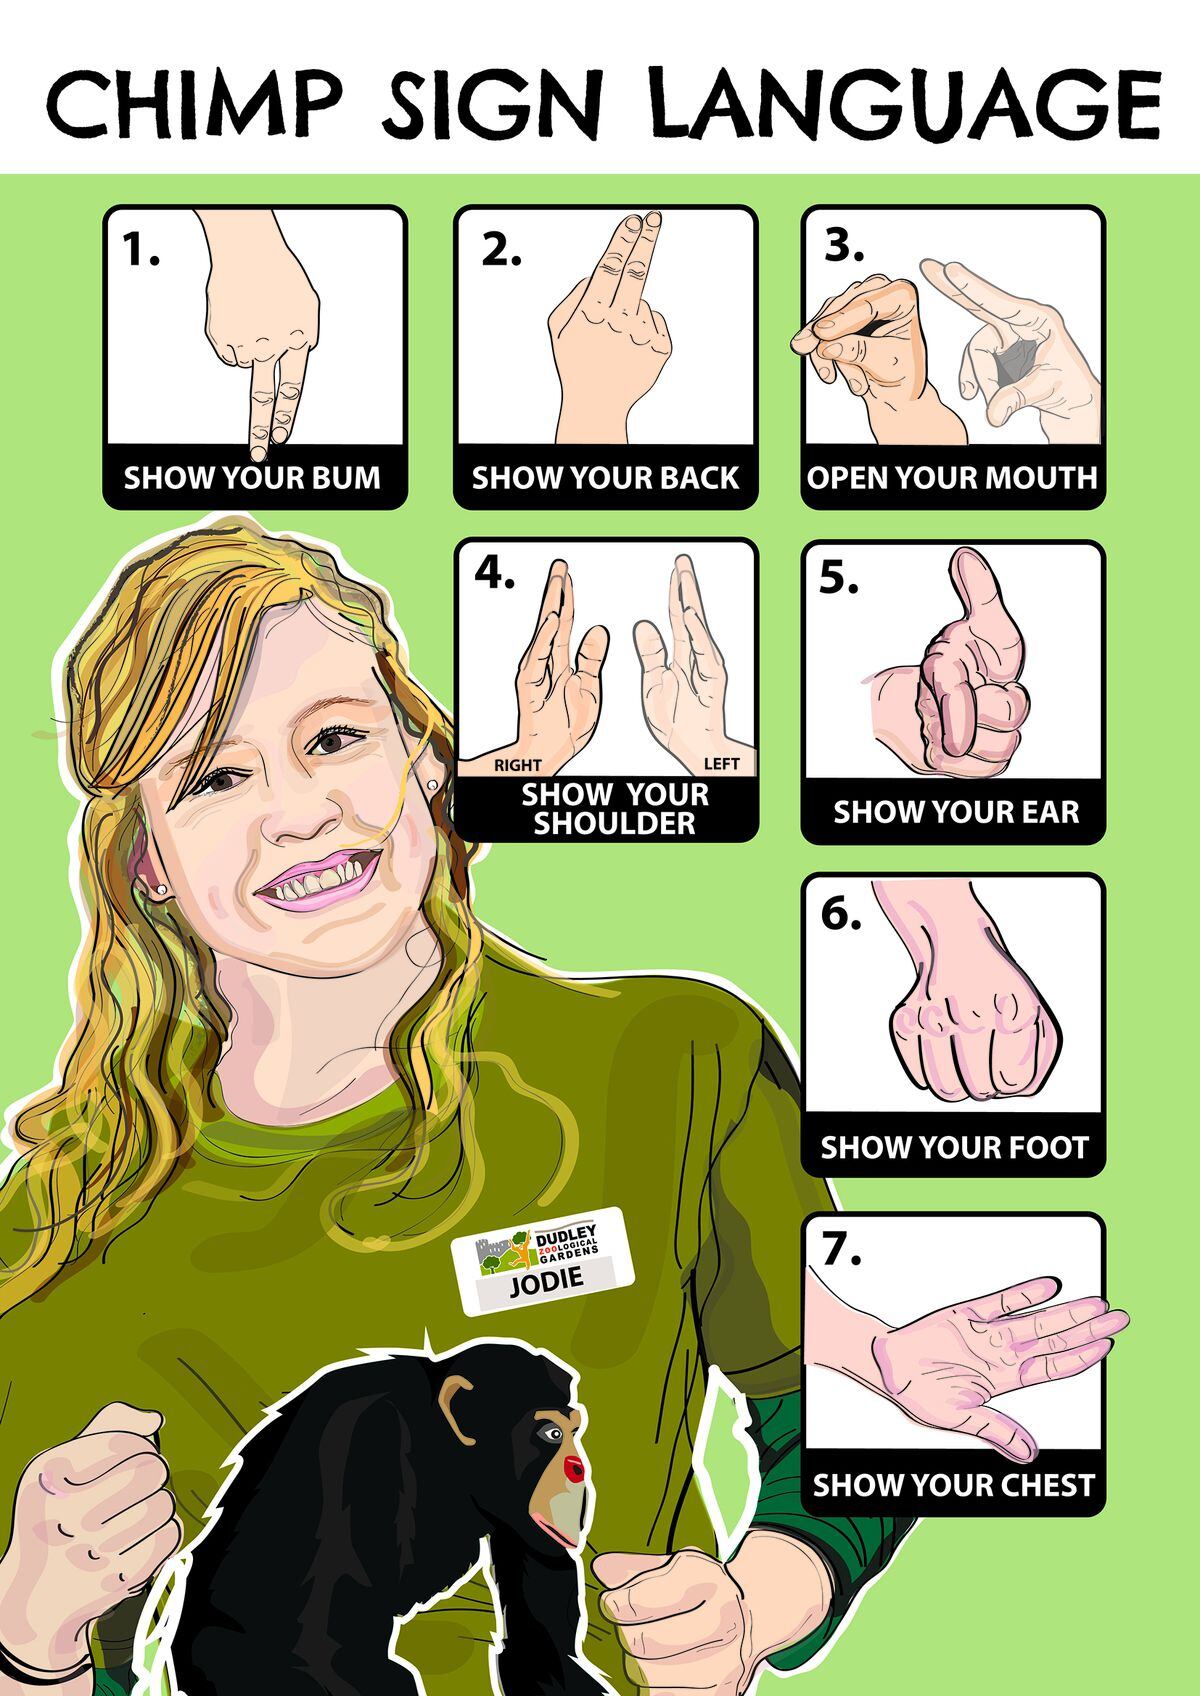 The poster featuring Jodie shows the chimps’ sign language